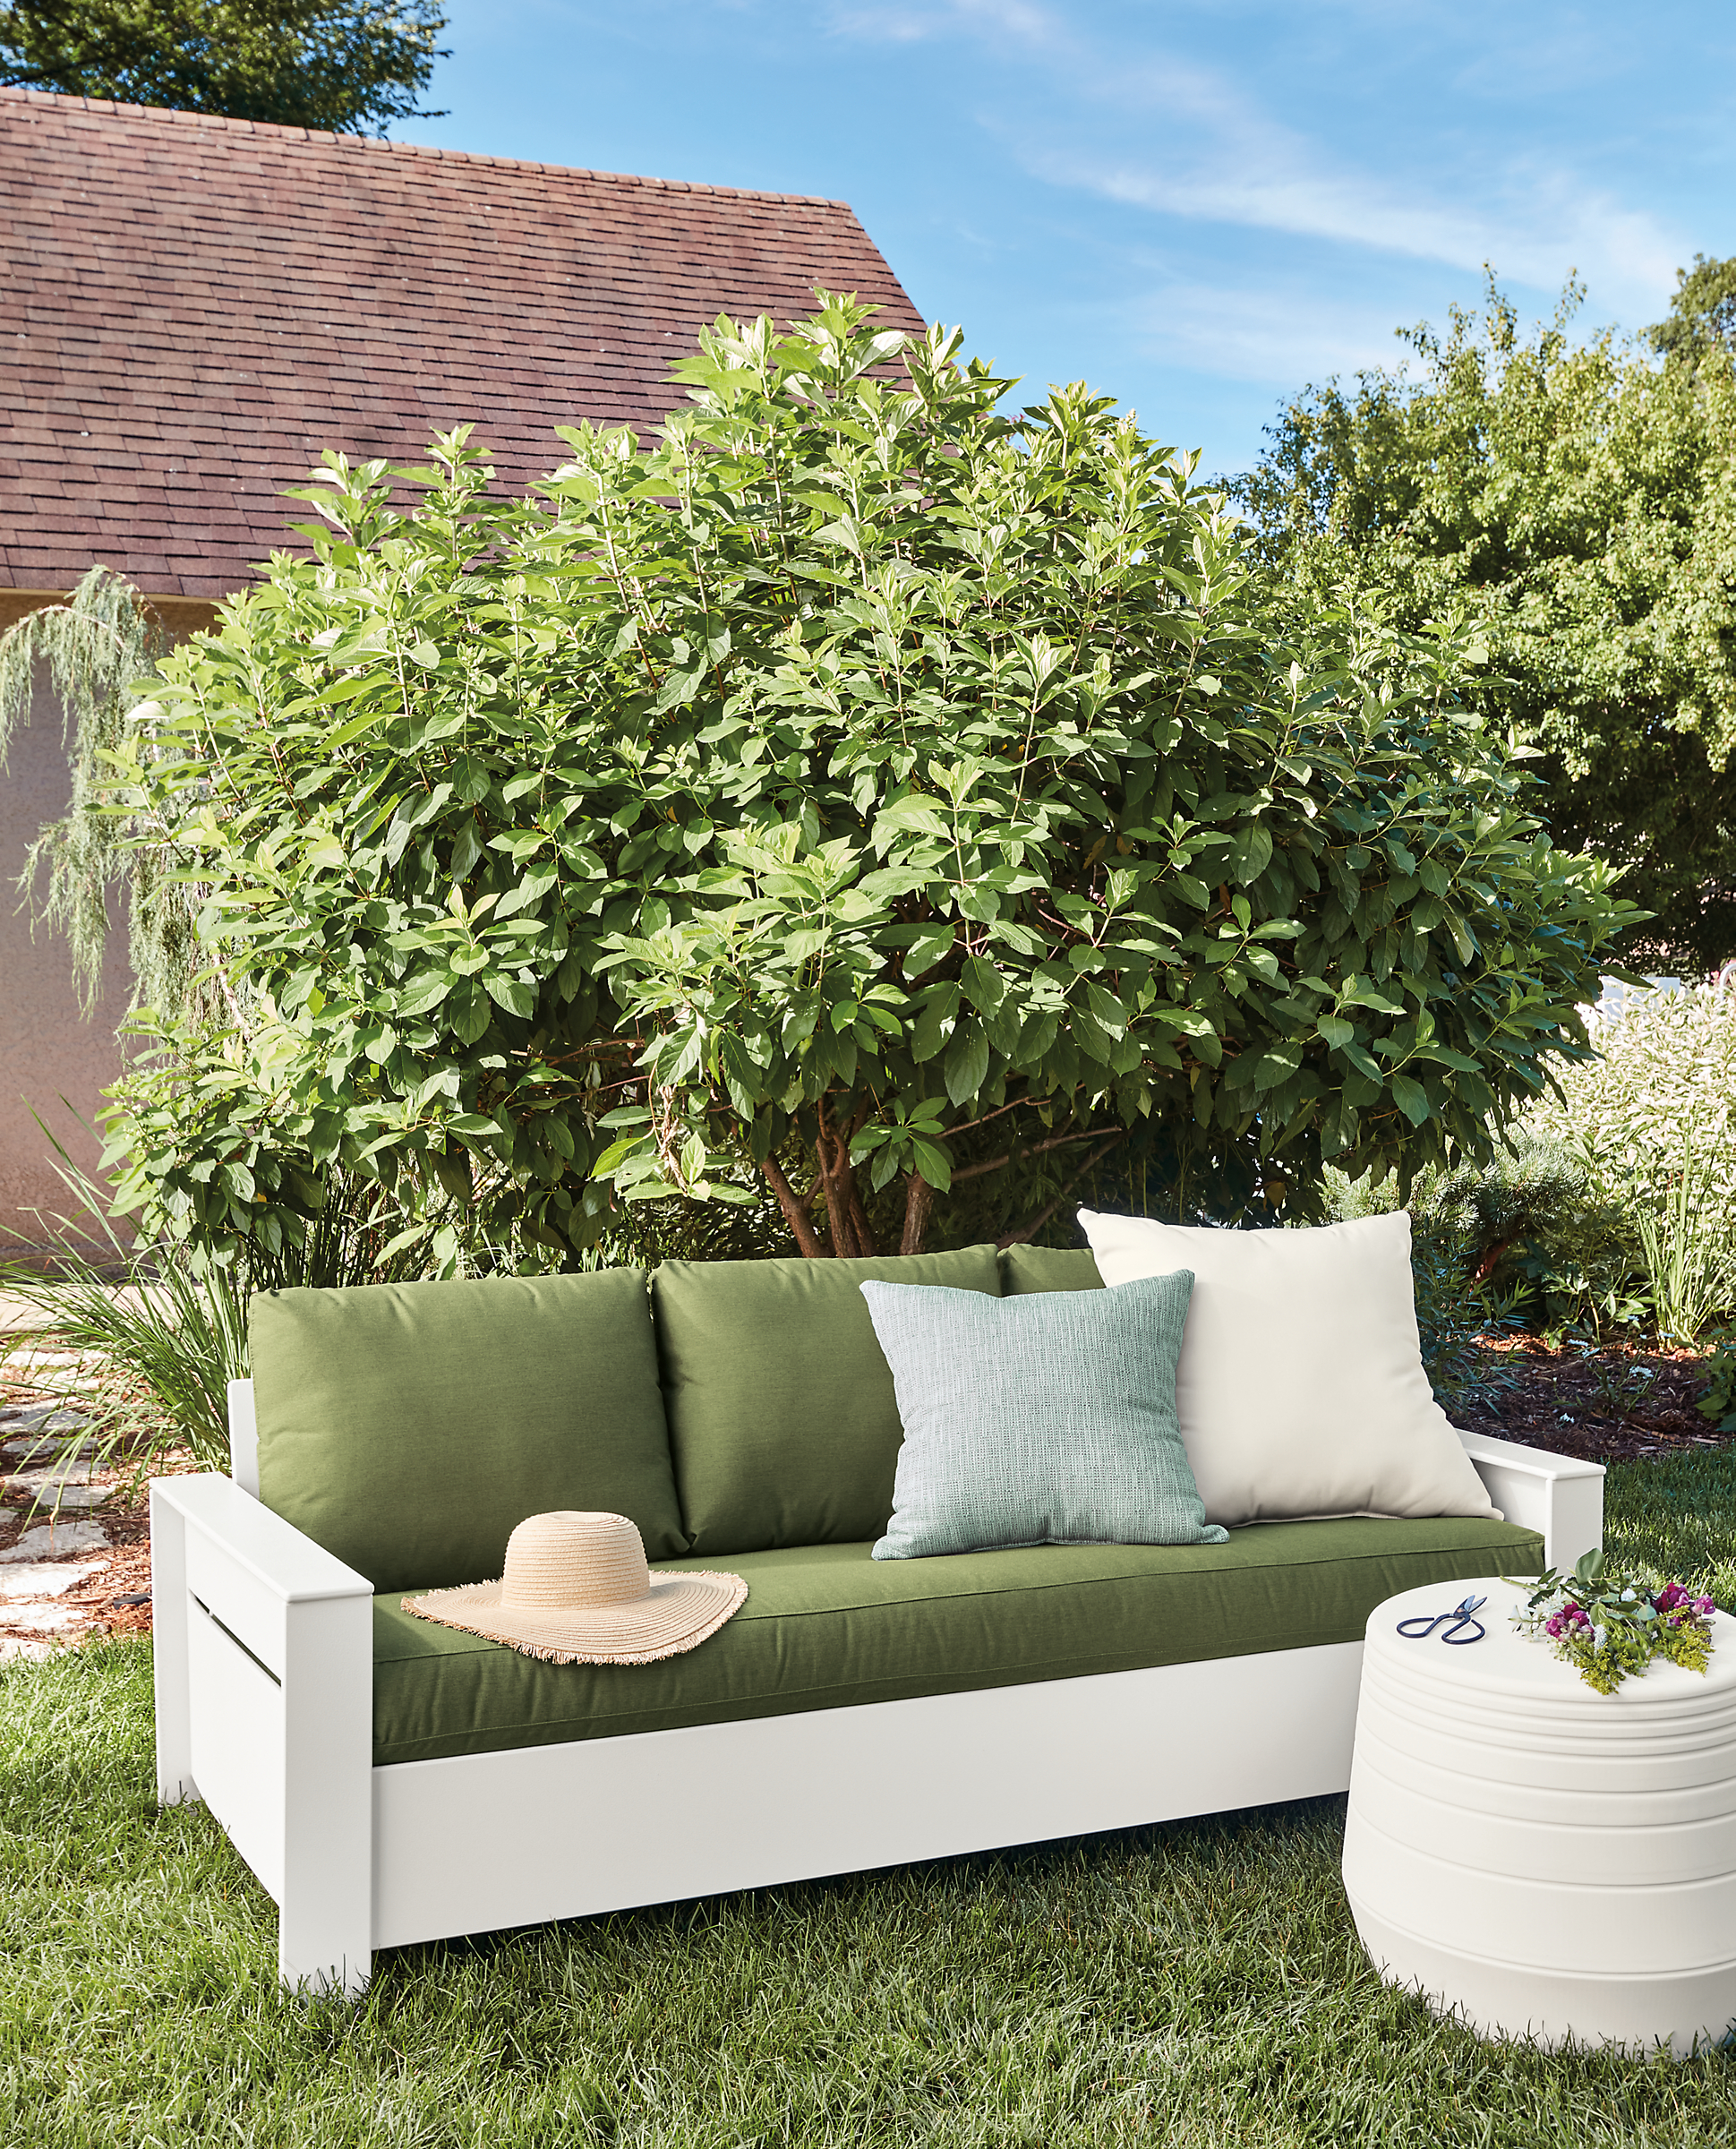 Outdoor setting with Rayo 75-inch sofa in White.